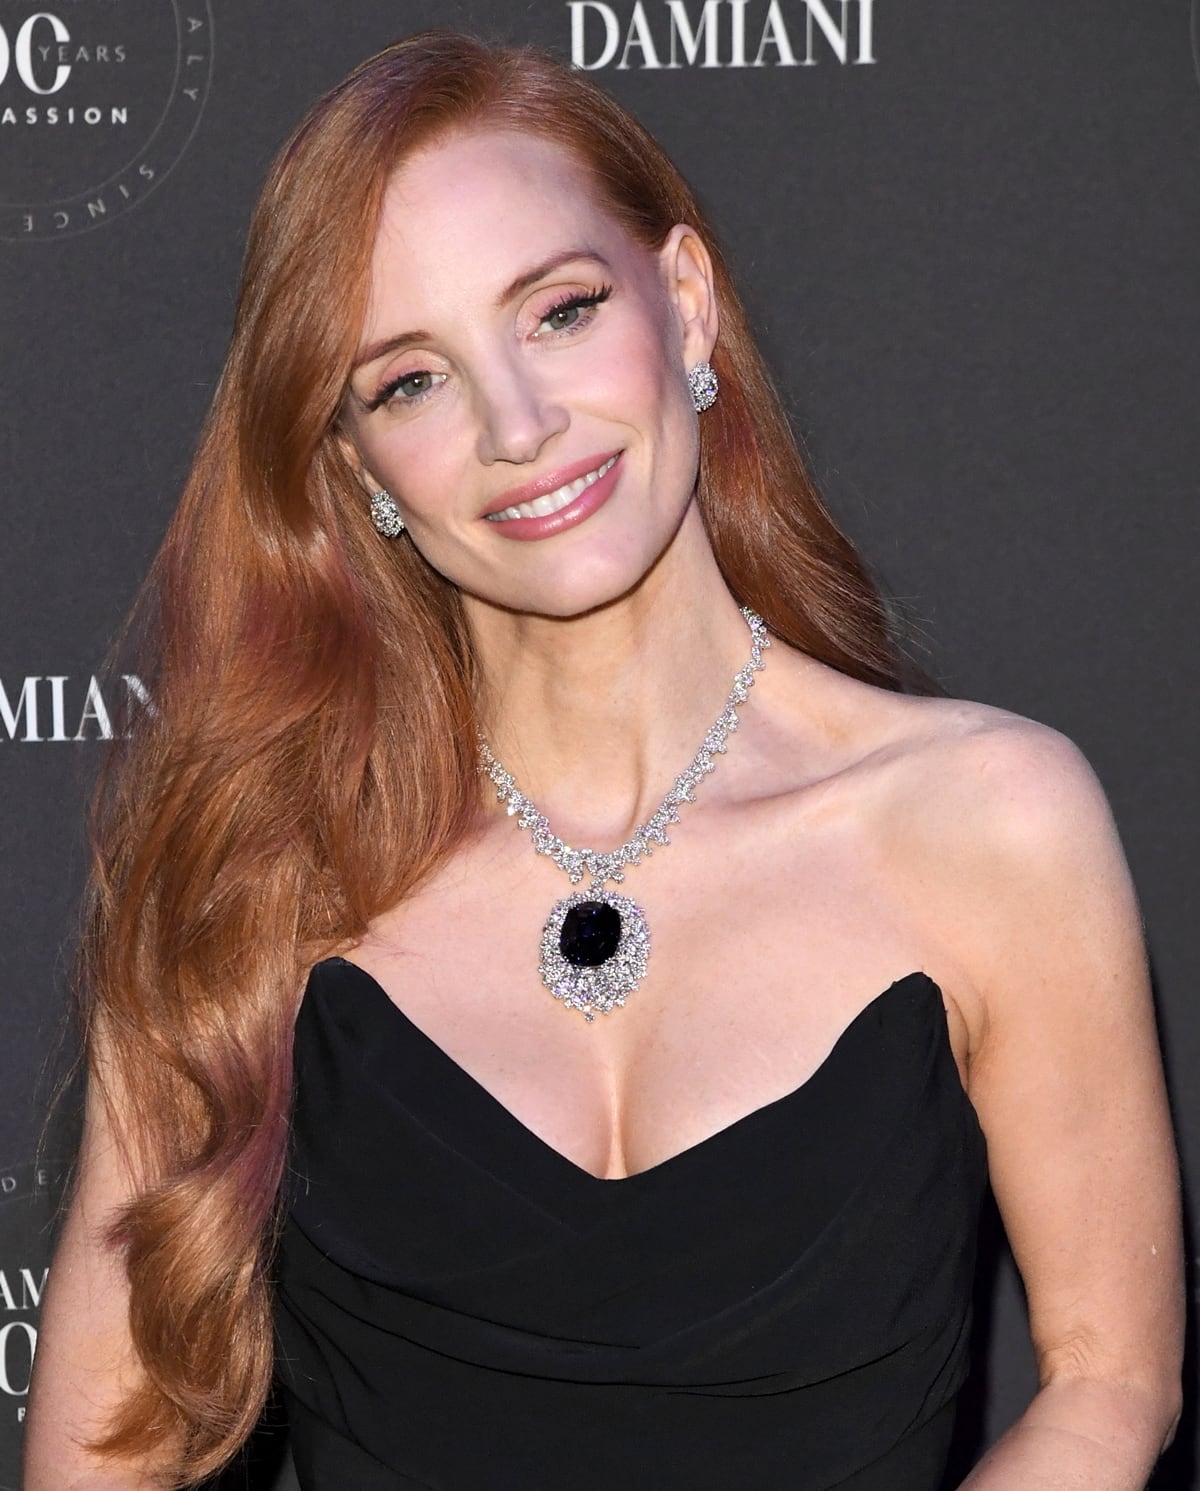 The Mismosa Eternal Blue necklace, featured on Jessica Chastain, is a masterpiece from Damiani's 100th-anniversary collection, showcasing 100.19 carats of dazzling diamonds encircling a stunning large sapphire, embodying Italian craftsmanship and luxury